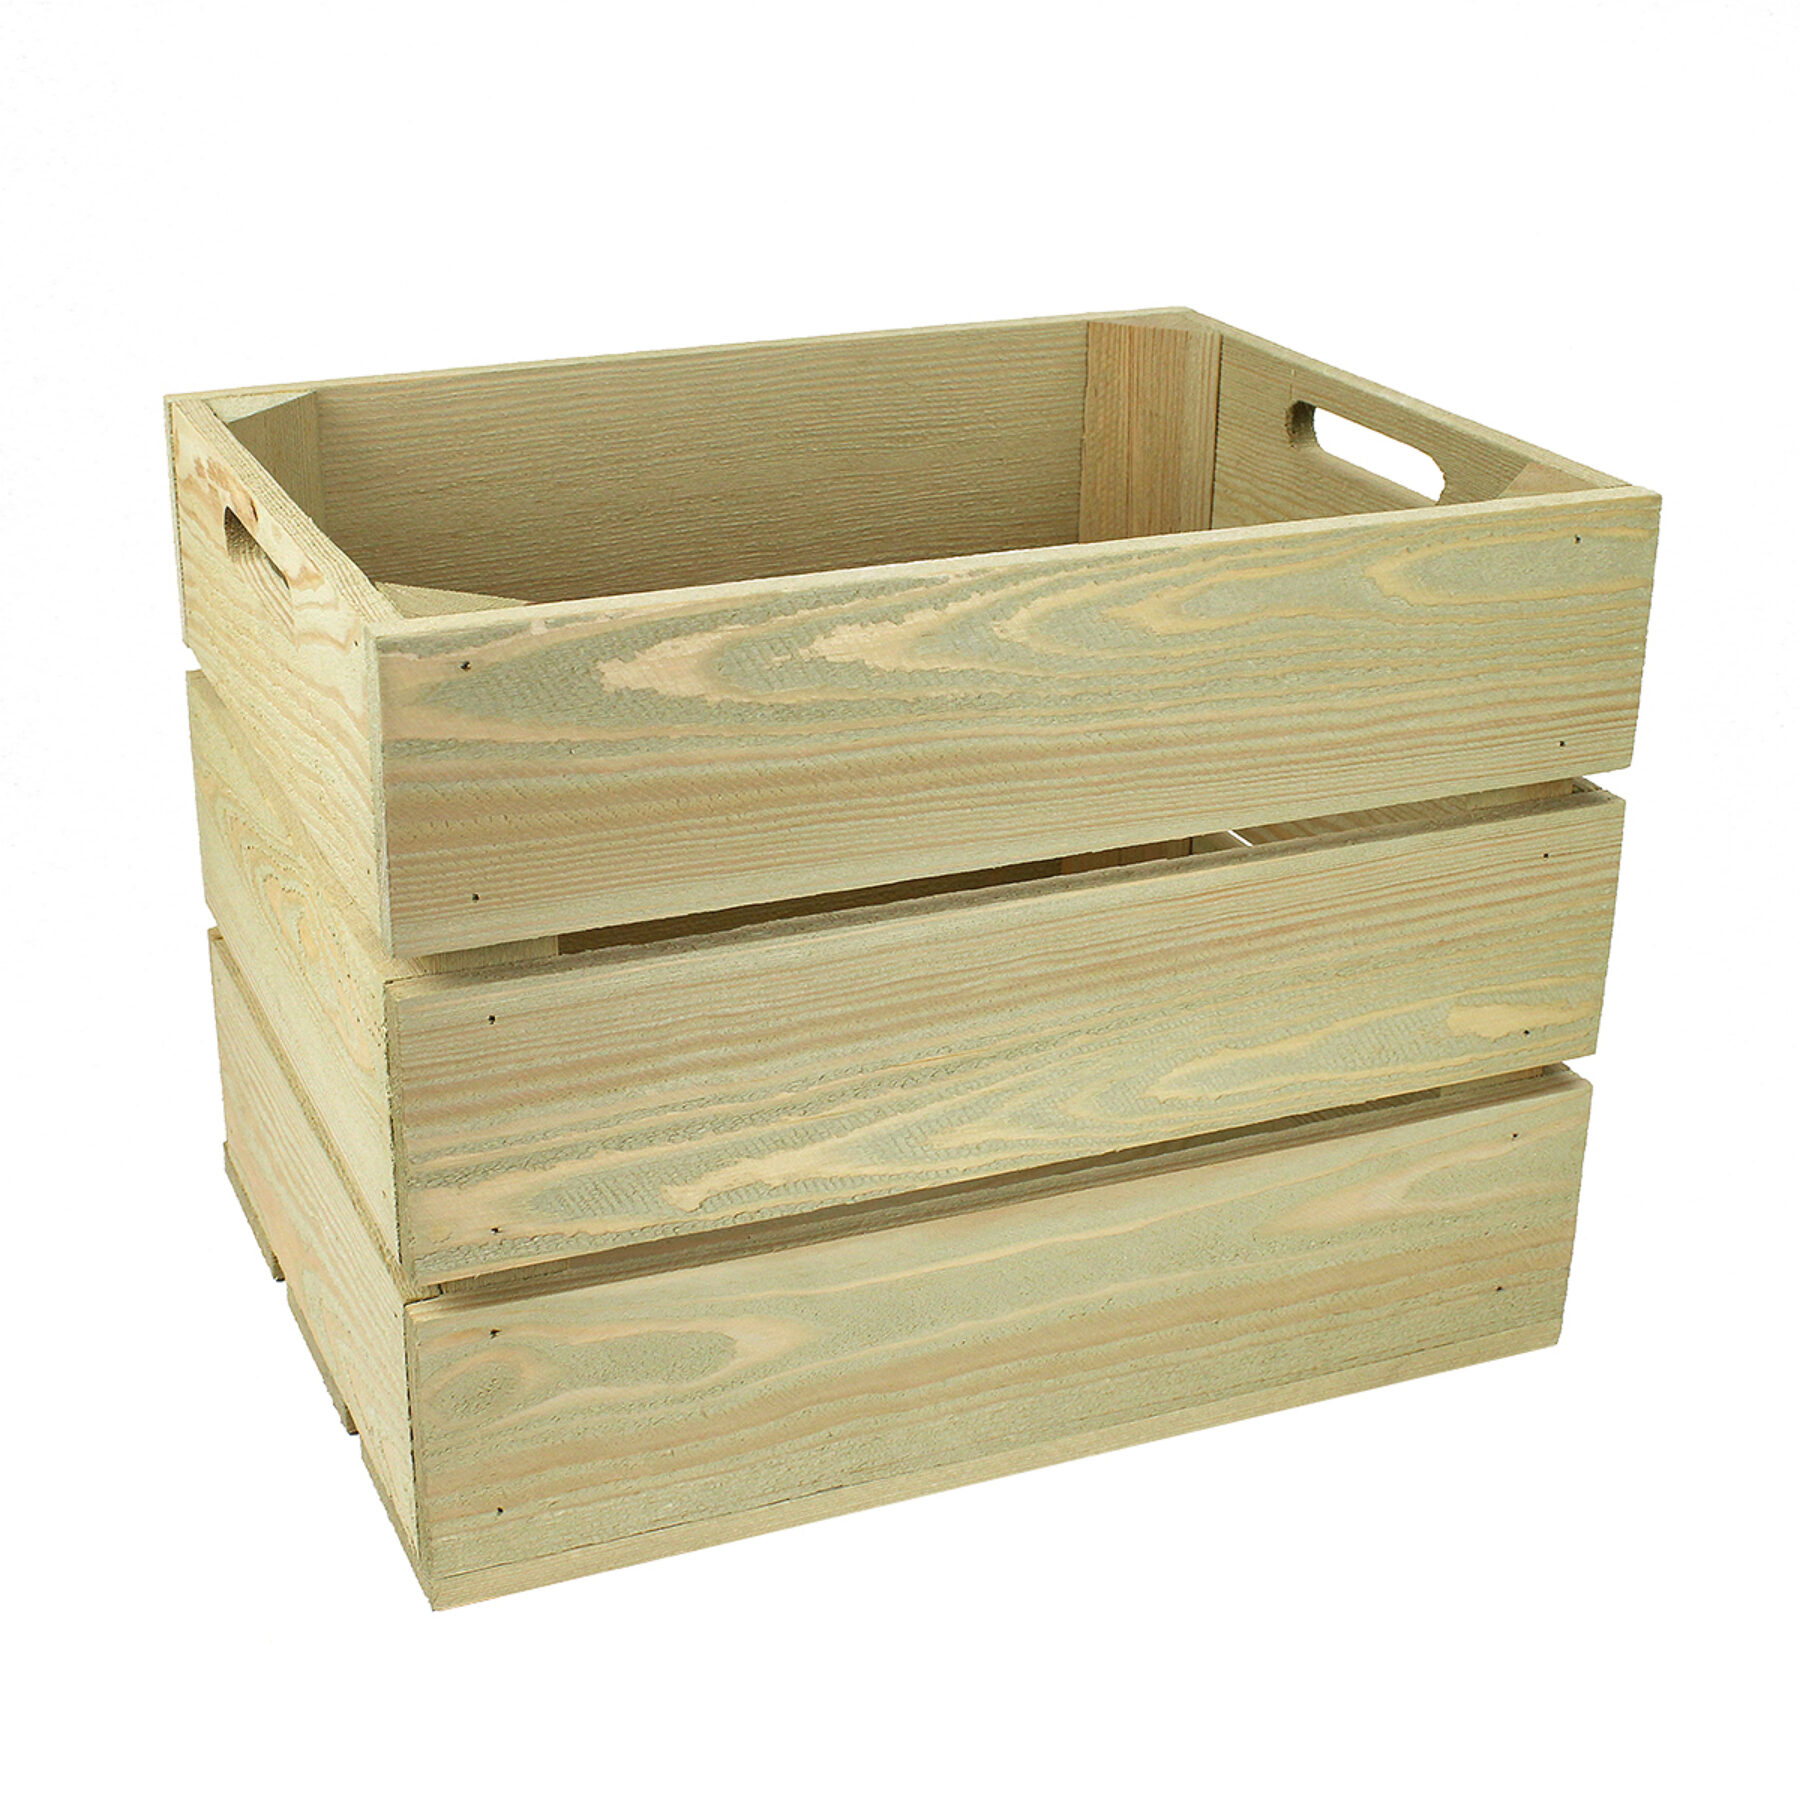 Large Rustic Wooden Display Crate